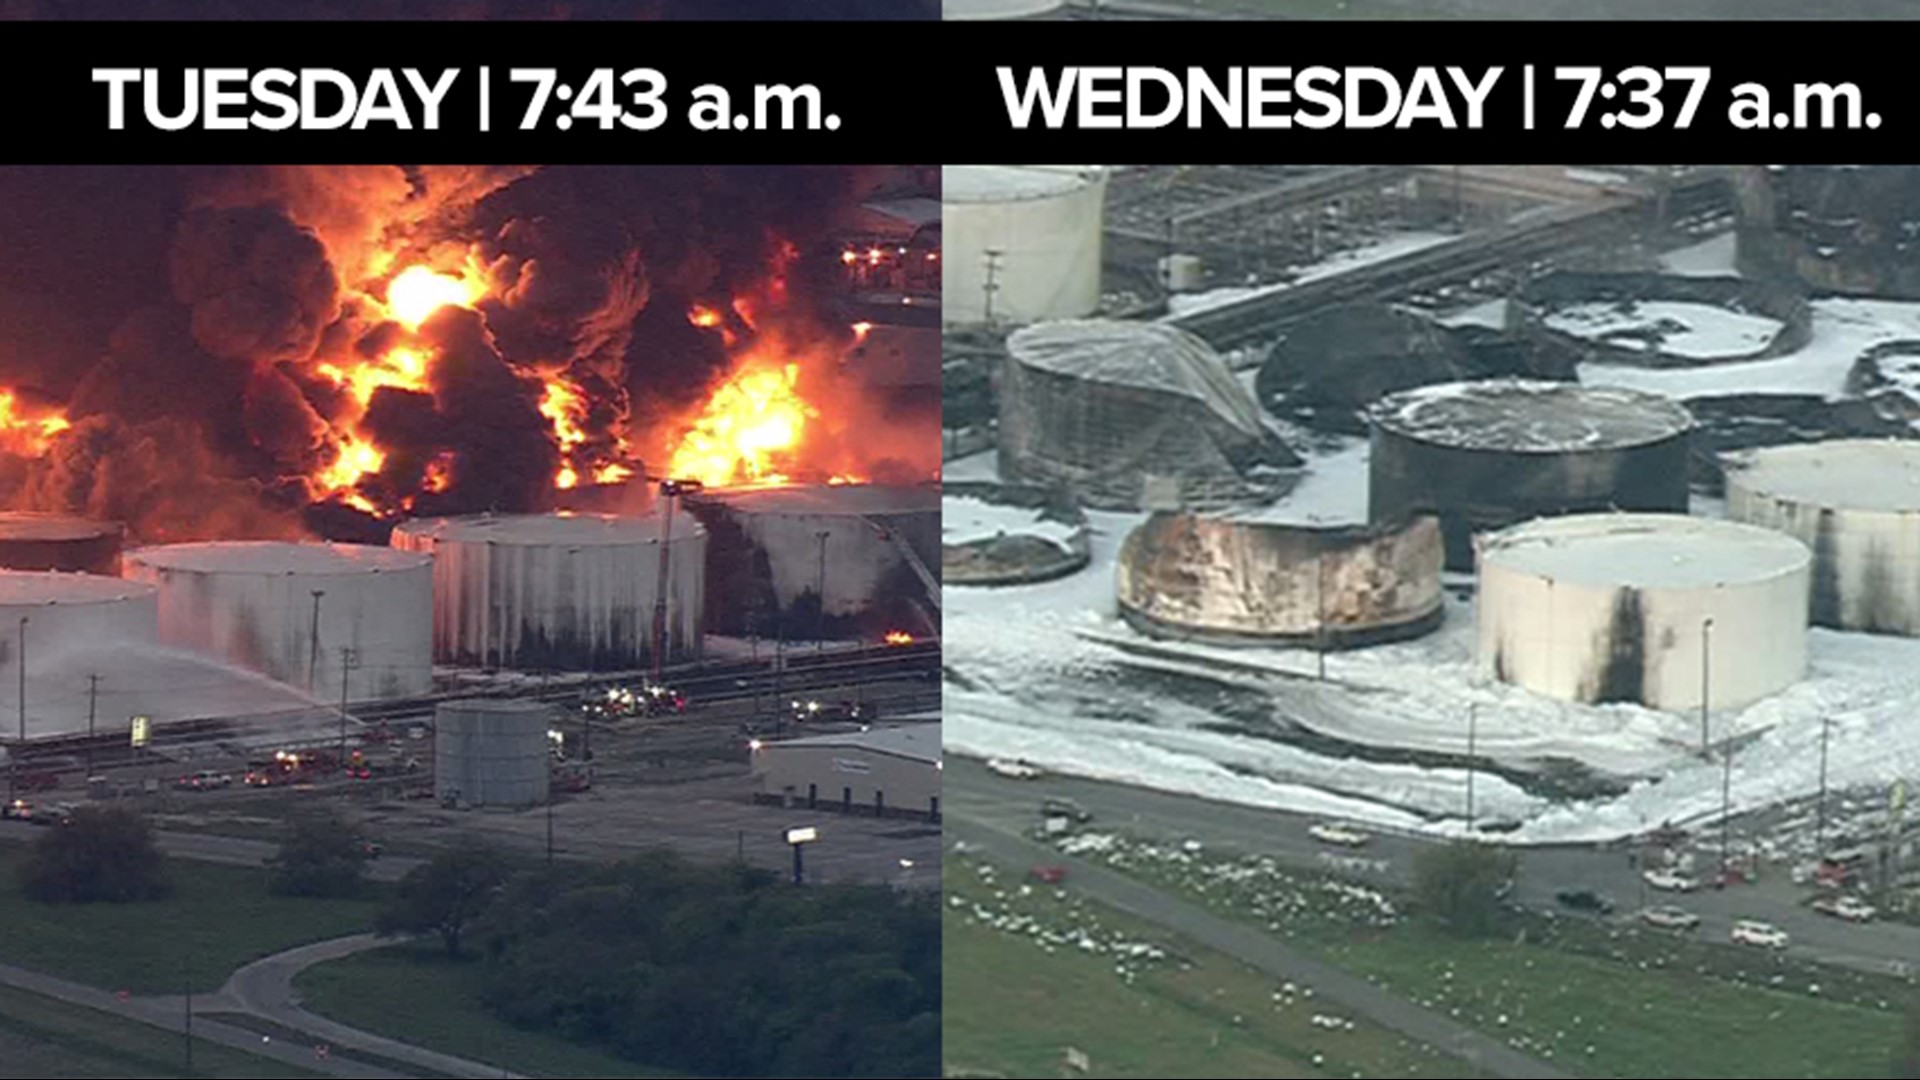 Firefighters have extinguished the tank farm fire that sent a plume of smoke over Houston for three days. At this time many schools are still scheduled to be closed today.